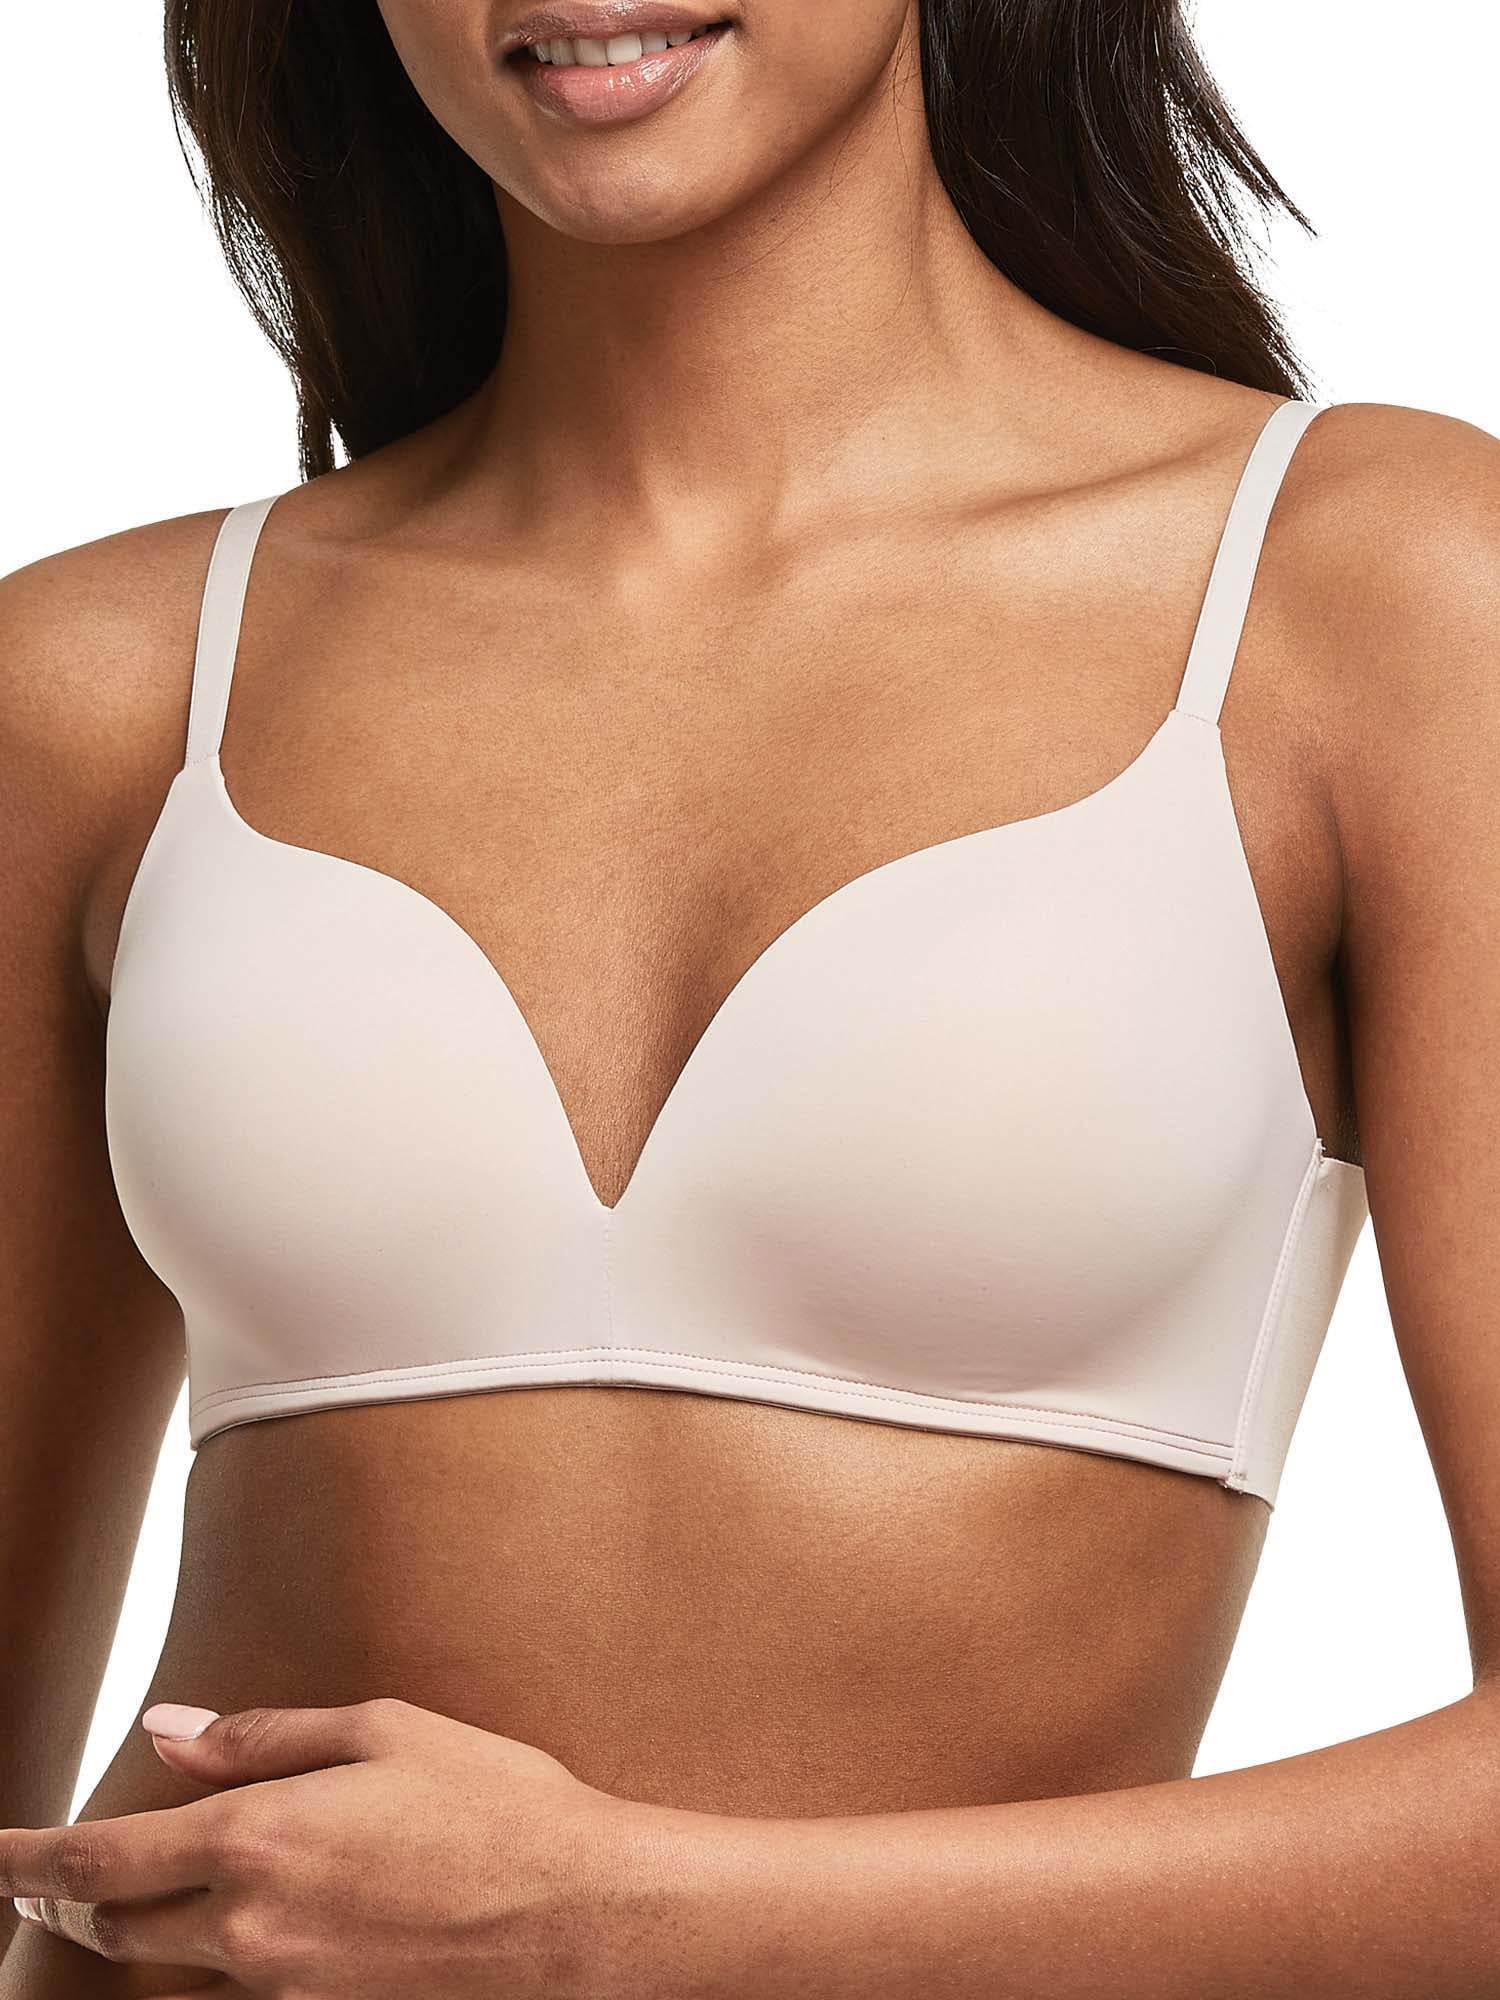 Maidenform bra 38C Size undefined - $22 New With Tags - From Stefanie